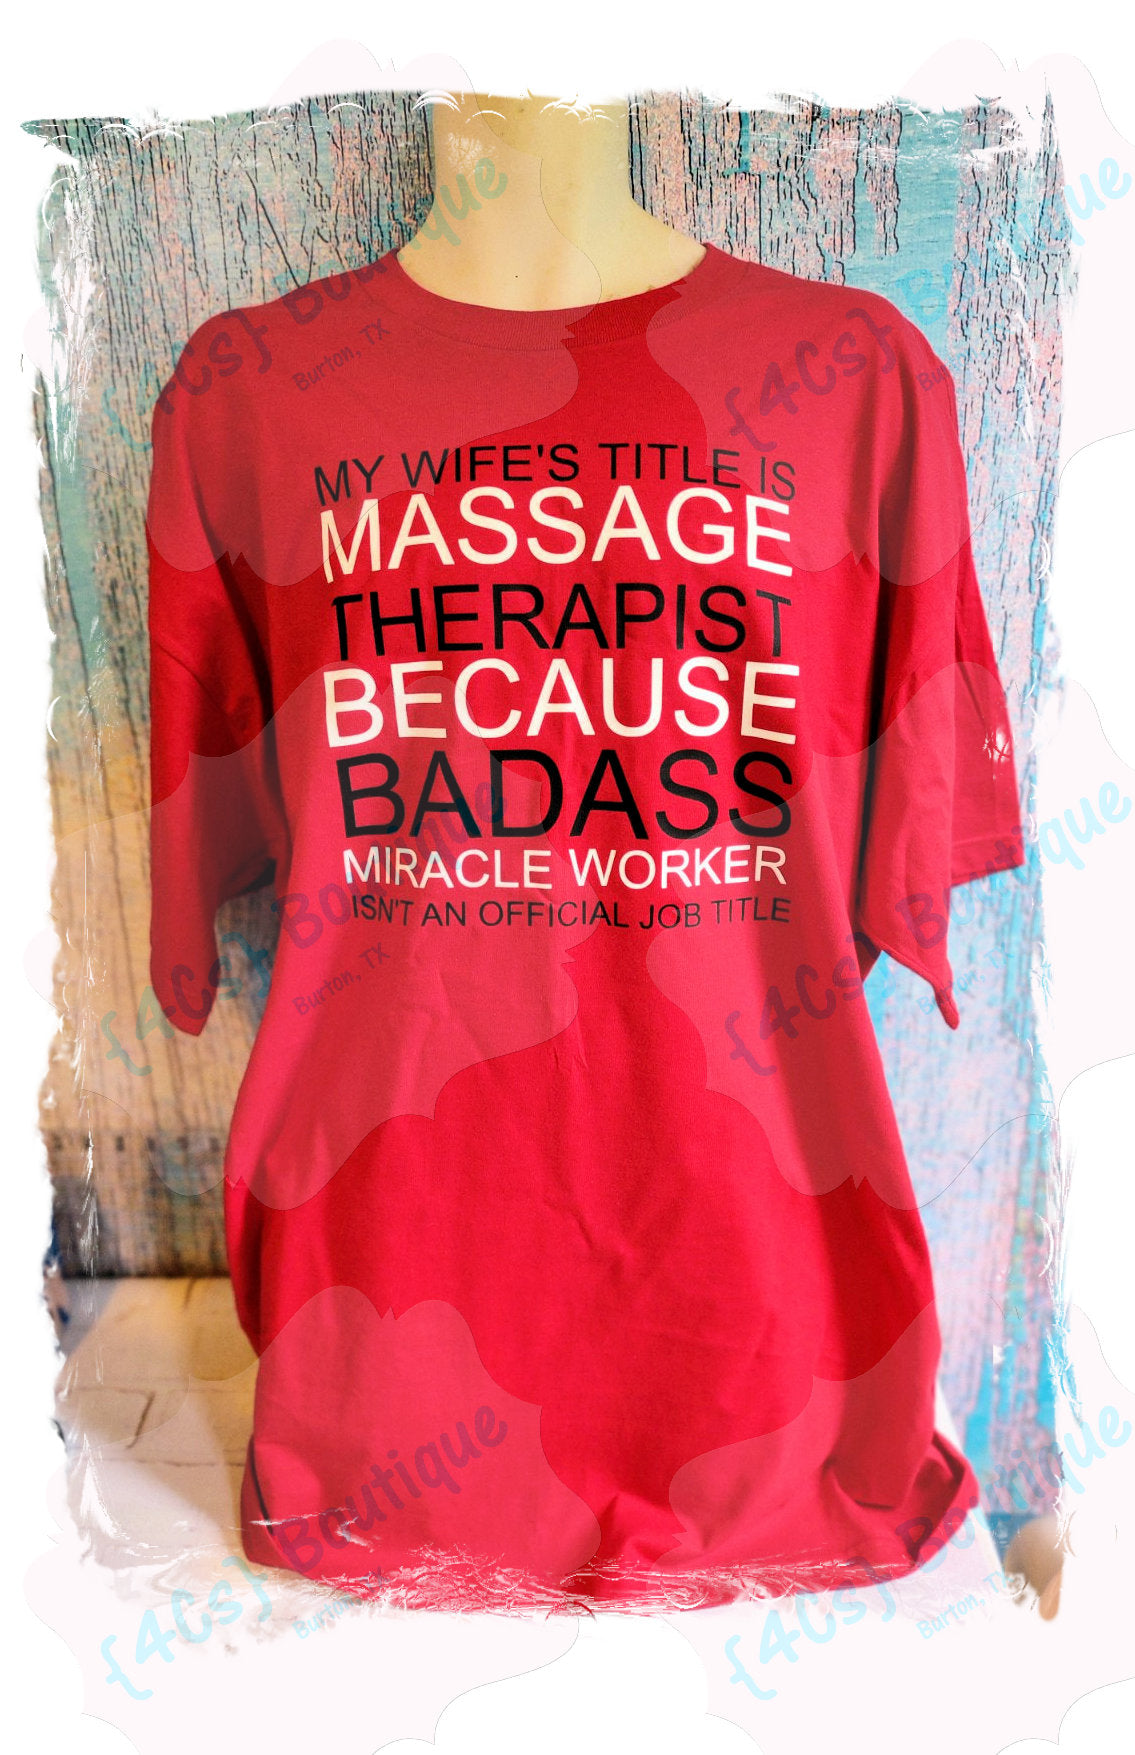 My Wife's Title is Massage Therapist Because.... Shirt